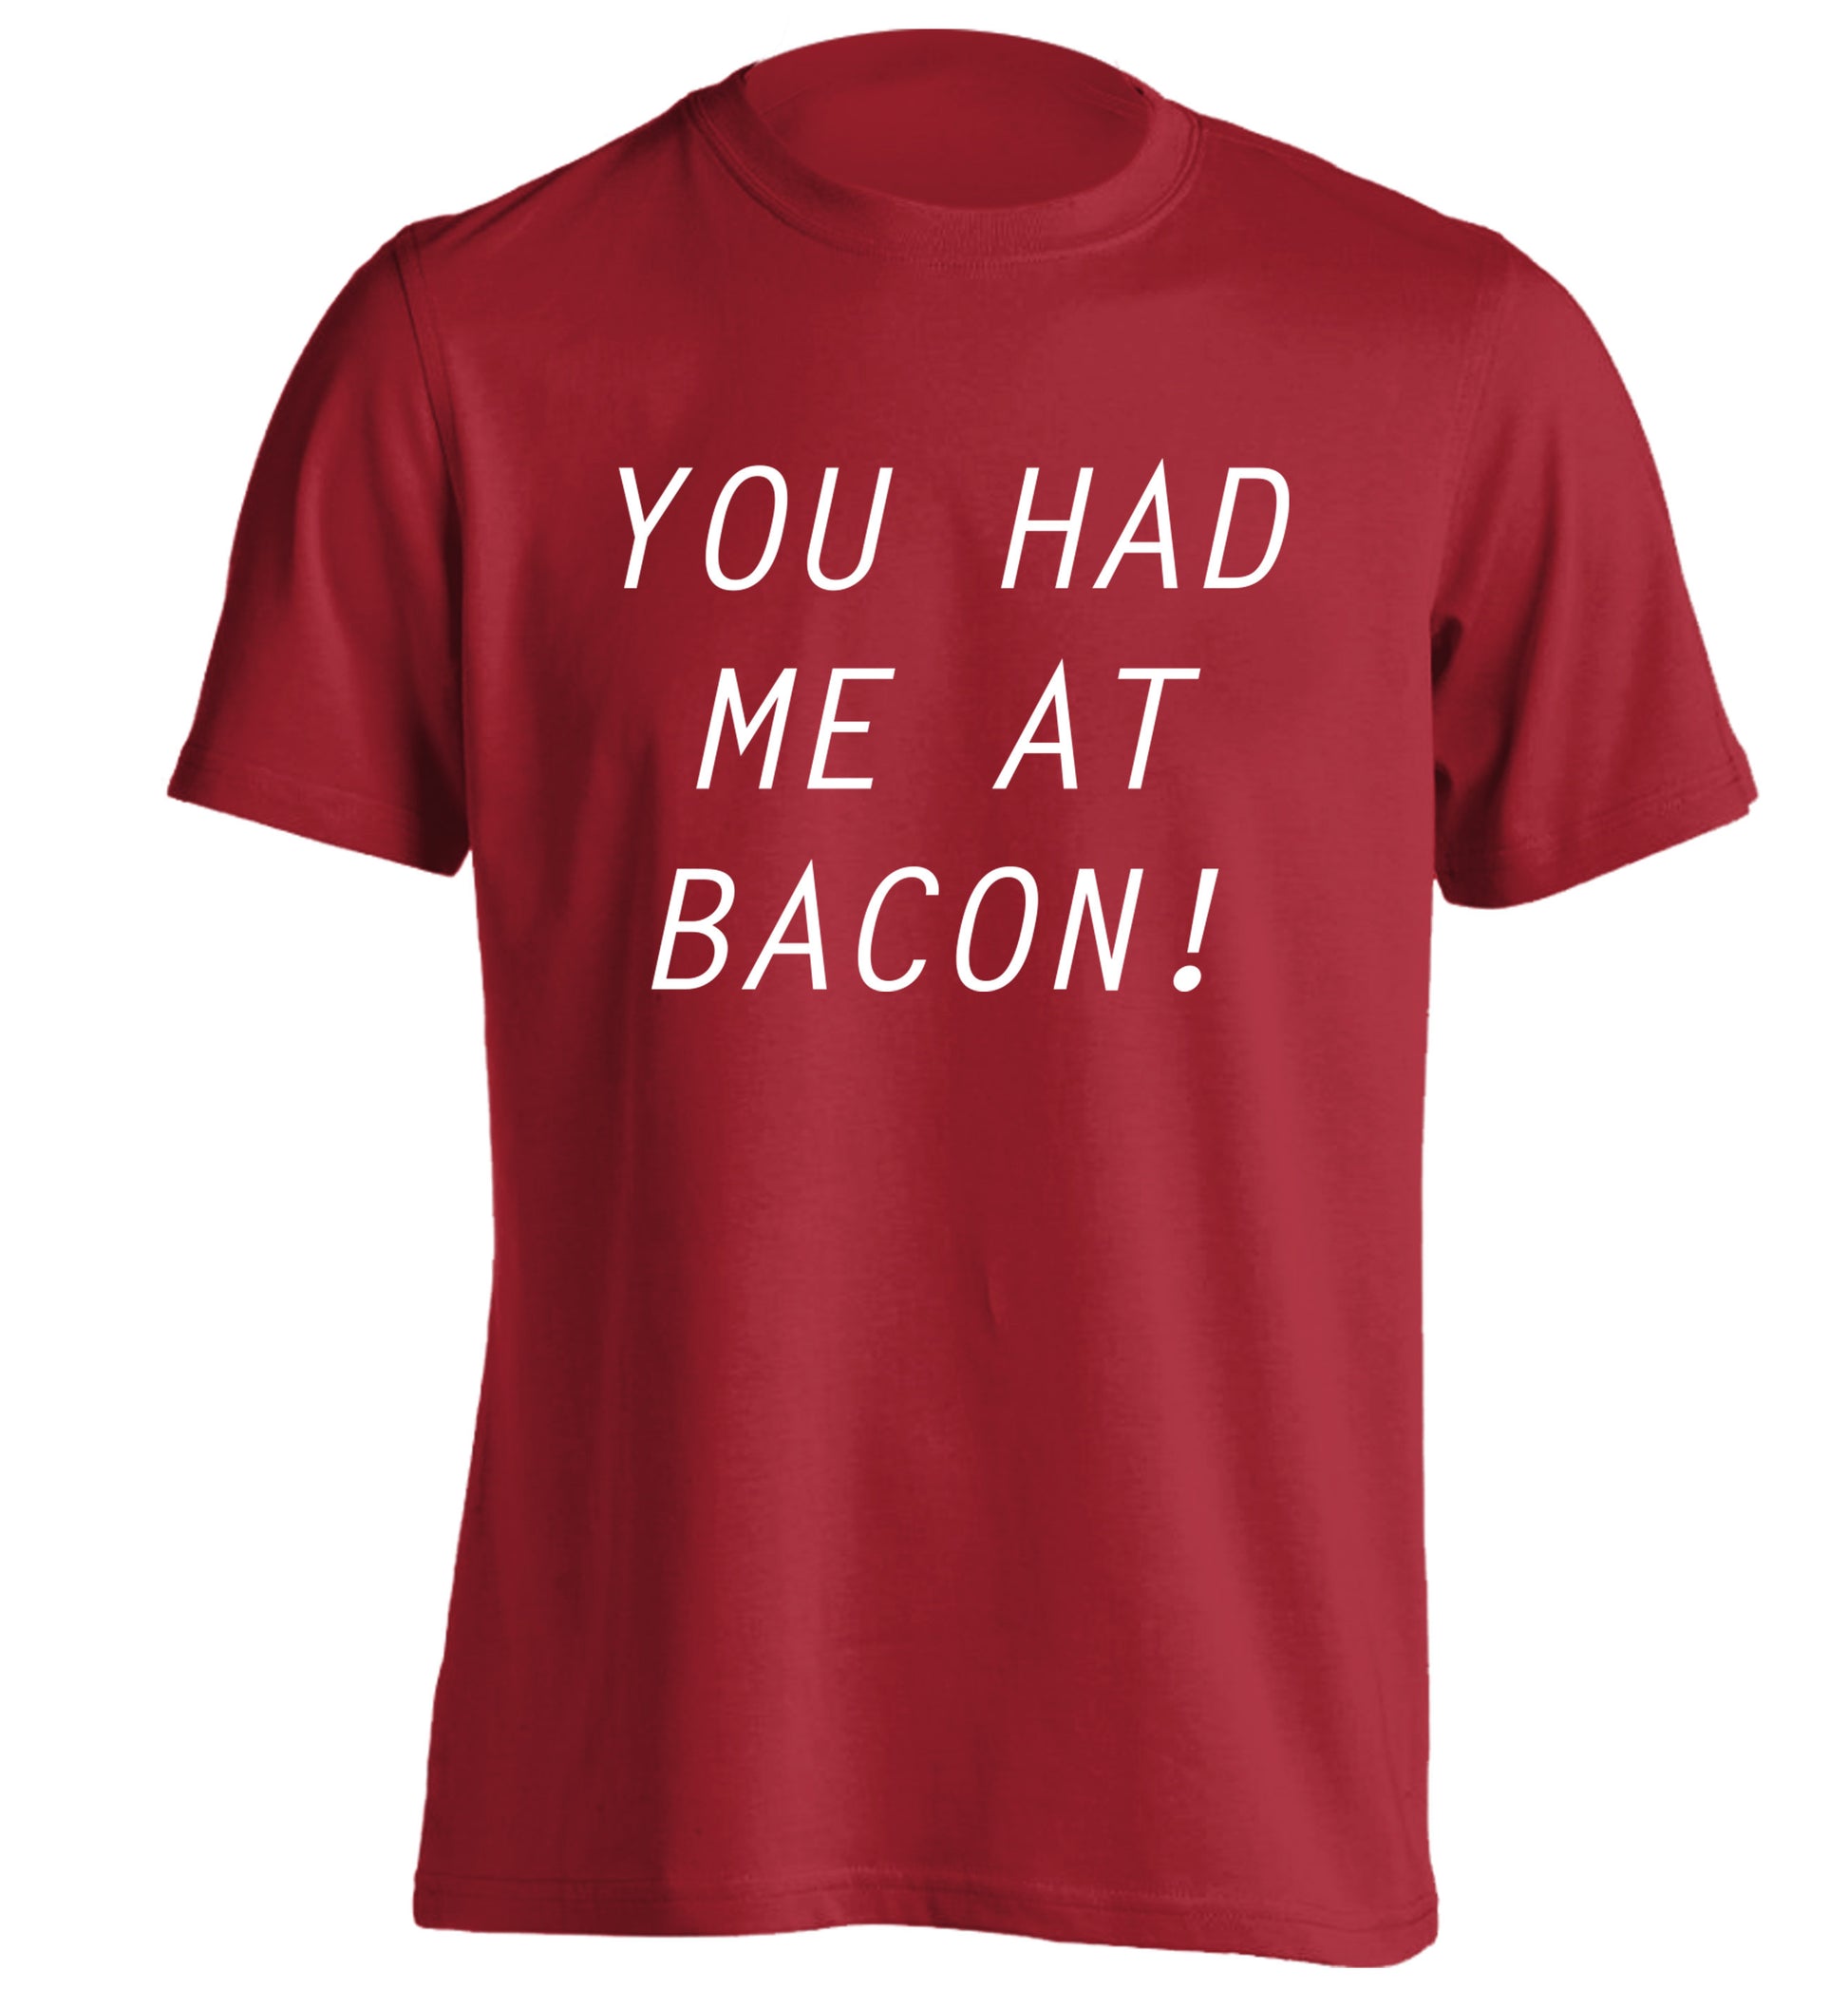 You had me at bacon adults unisex red Tshirt 2XL